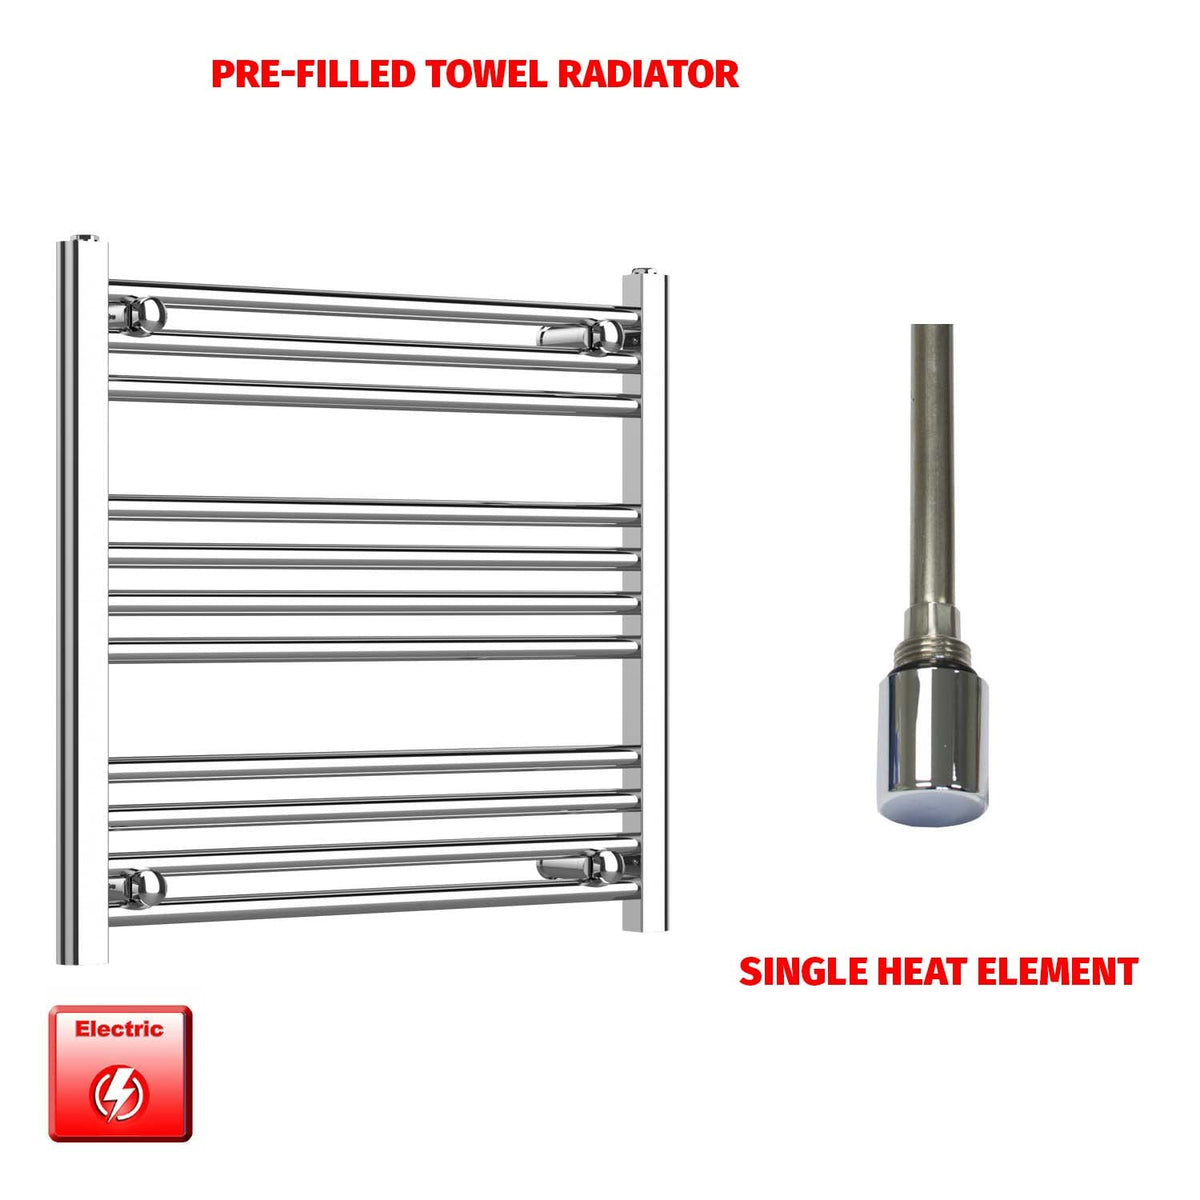 600 x 650 Pre-Filled Electric Heated Towel Radiator Straight Chrome